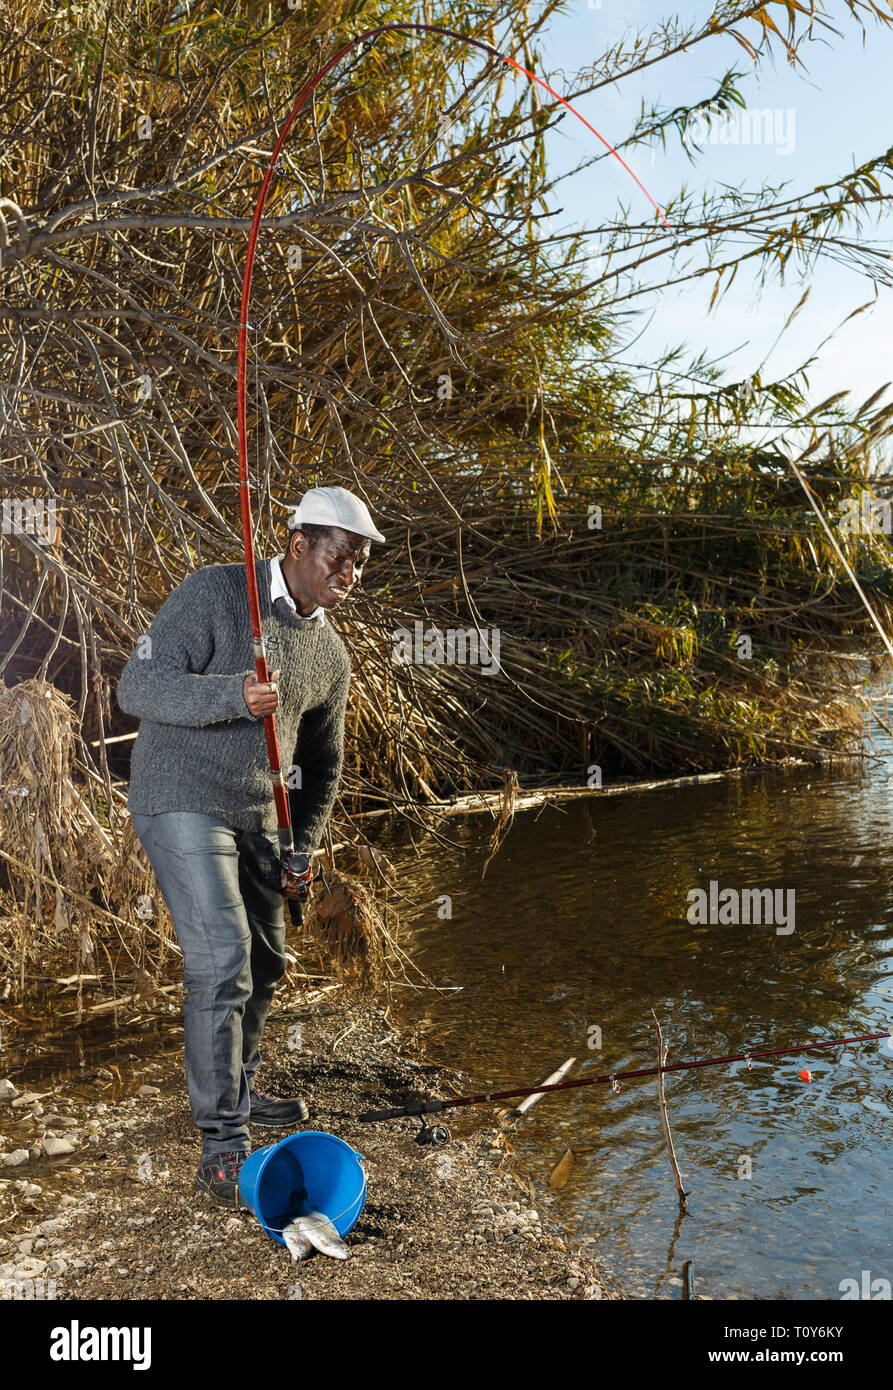 Mature African man standing near river and pulling fish expressing emotions of dedication Stock Photo